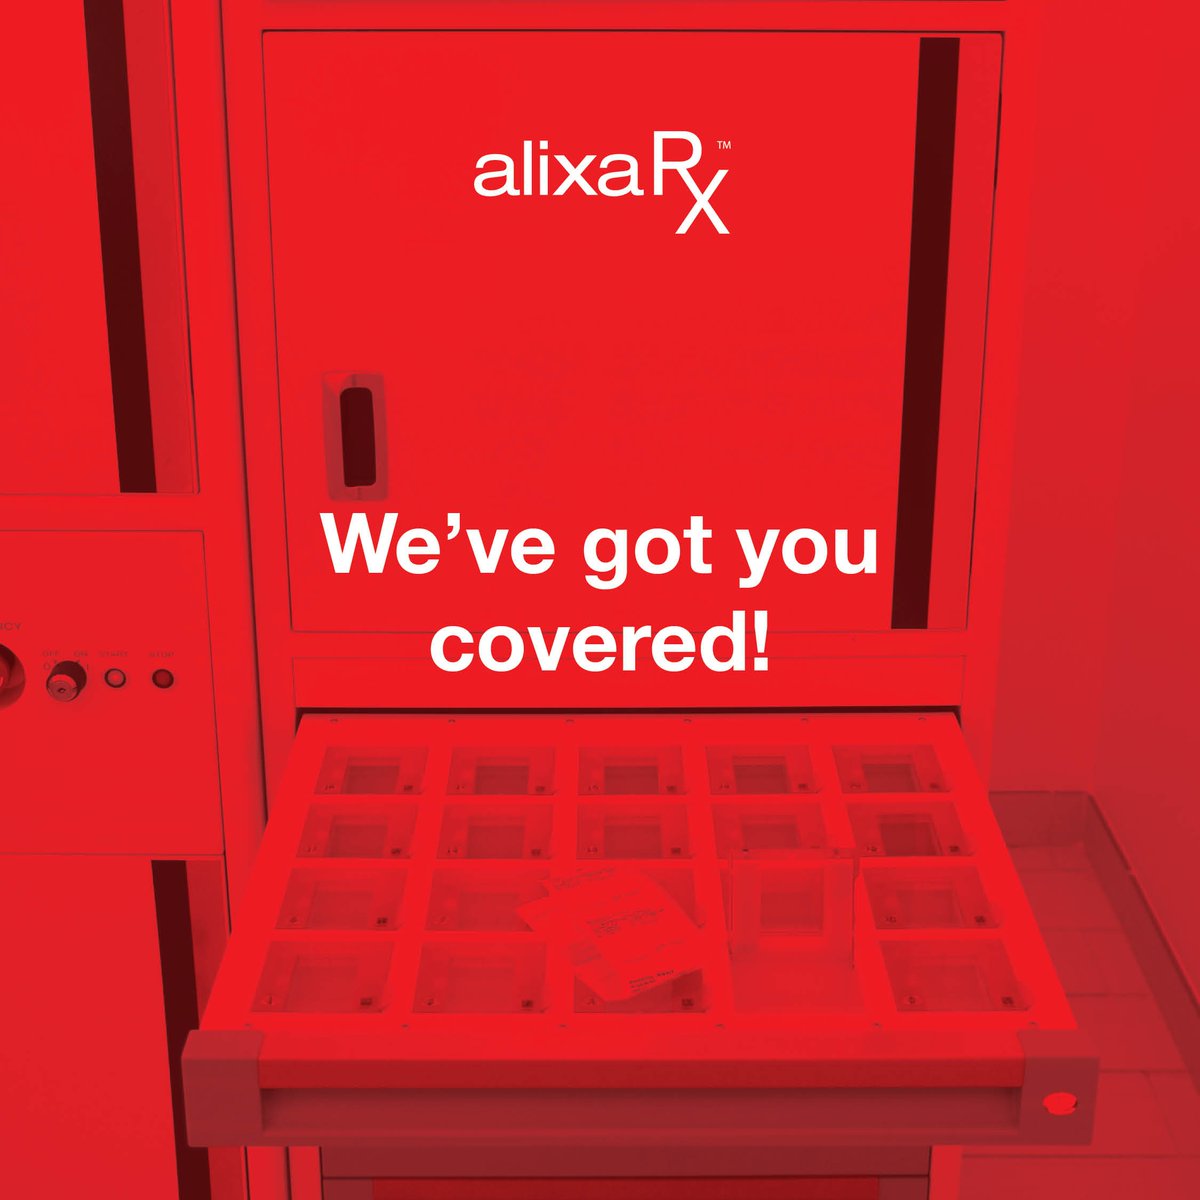 AlixaRx provides local support with a national presence.

Contact us today. alixarx.com/contact-us/

#AlixaRx #PharmacyServices #LTC